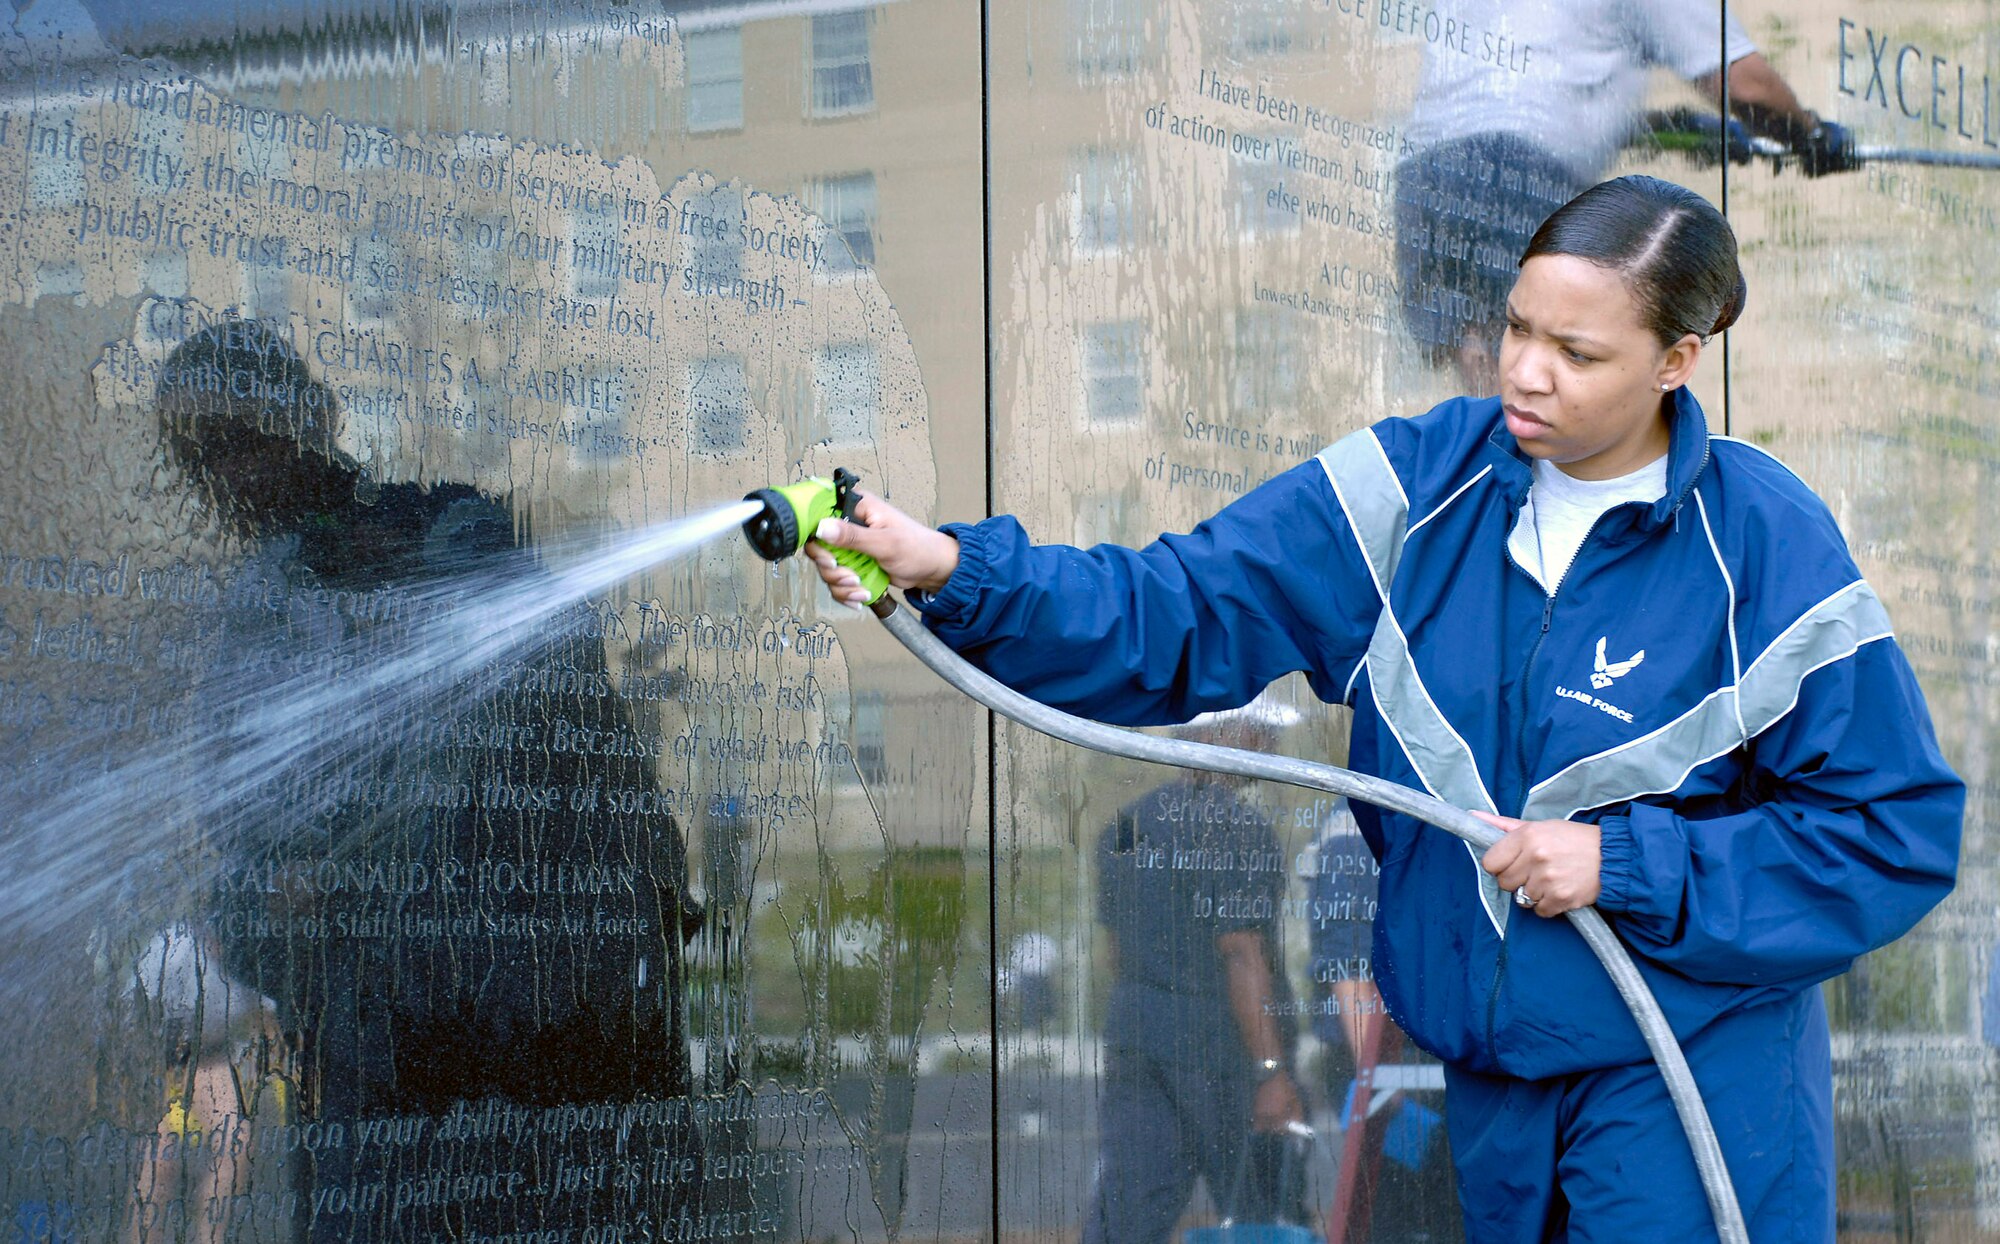 Staff Sgt. Shannah Holmes hoses down the granite wall during a work party April 19 at the Air Force Memorial.  More than 50 volunteers from Air Force Sergeants Association Chapter 300 in Washington D.C. gathered to help spruce up the site.  Dedicated on Oct., 14, 2006, the memorial honors the service and sacrifice of the men and women of the United States Air Force and its predecessor organizations.  The wall bears the inscriptions of combat campaigns and expeditionary operations and contains the words of Air Force leaders that relate to the service's core values of Integrity First, Service Before Self and Excellence in All We Do. The memorial is located just outside the nation's capital in Arlington, Va., adjacent to Arlington National Cemetery and overlooking the Pentagon.  Sergeant Holmes works in the Pentagon in the Secretary of the Air Force Financial Management and Comptroller's Office.  (U.S. Air Force photo/Senior Master Sgt. Matt Proietti)